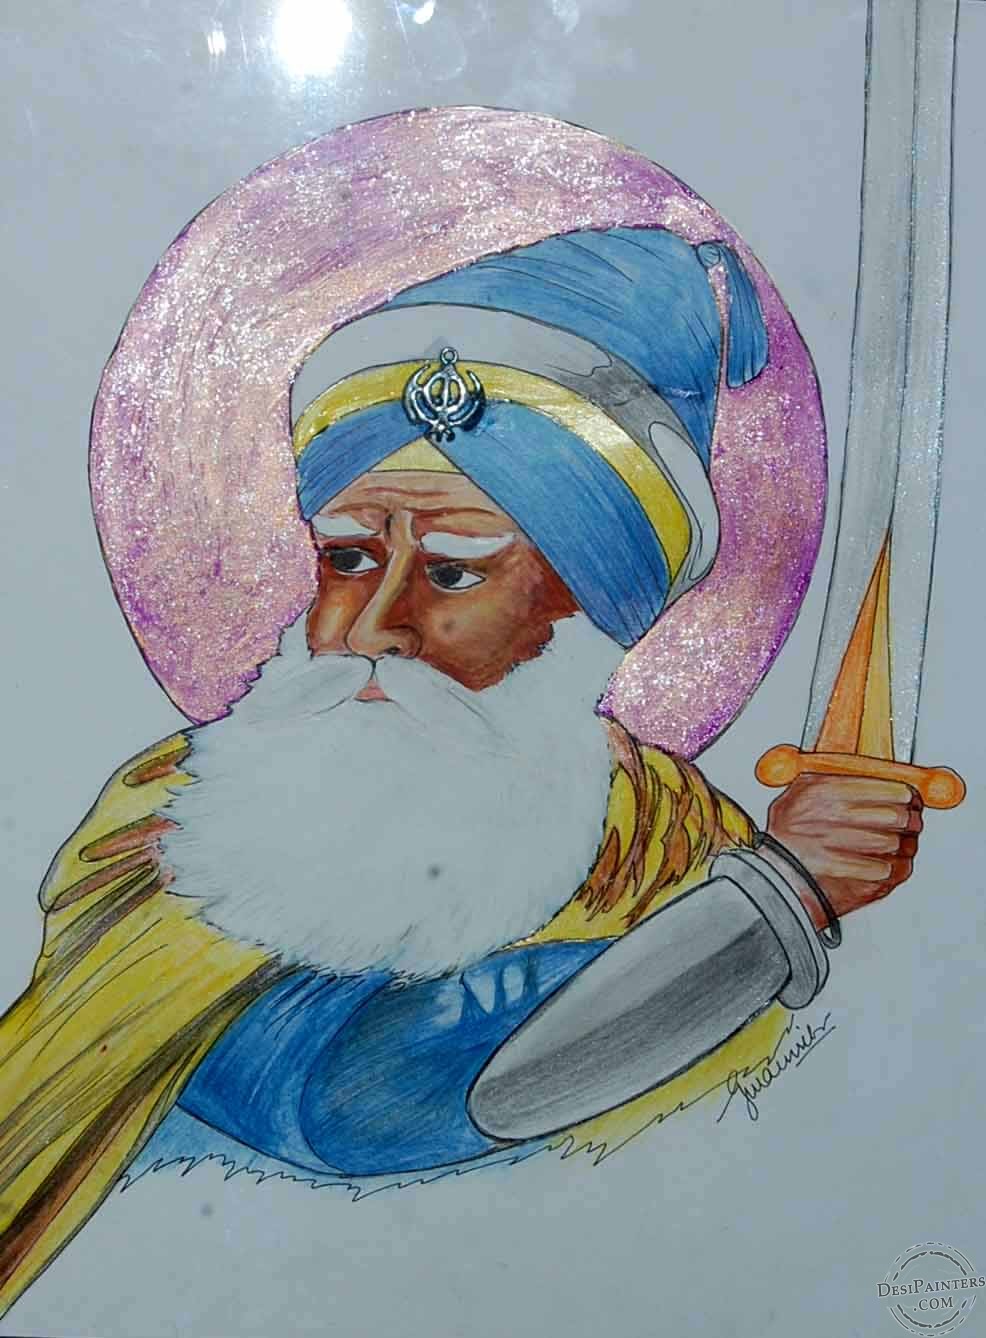 Baba Deep Singh g Wallpapers, Inspirational Quotes, Motivational Sayings,  Thoughts, Messages, SMS, Wishes, Images, Suvichar, Anmol Vachan, Shabad,  Stories, History, Informations, About, English, Hindi, Bengali, Telugu,  Marathi, Tamil, Gujarati, Kannada ...